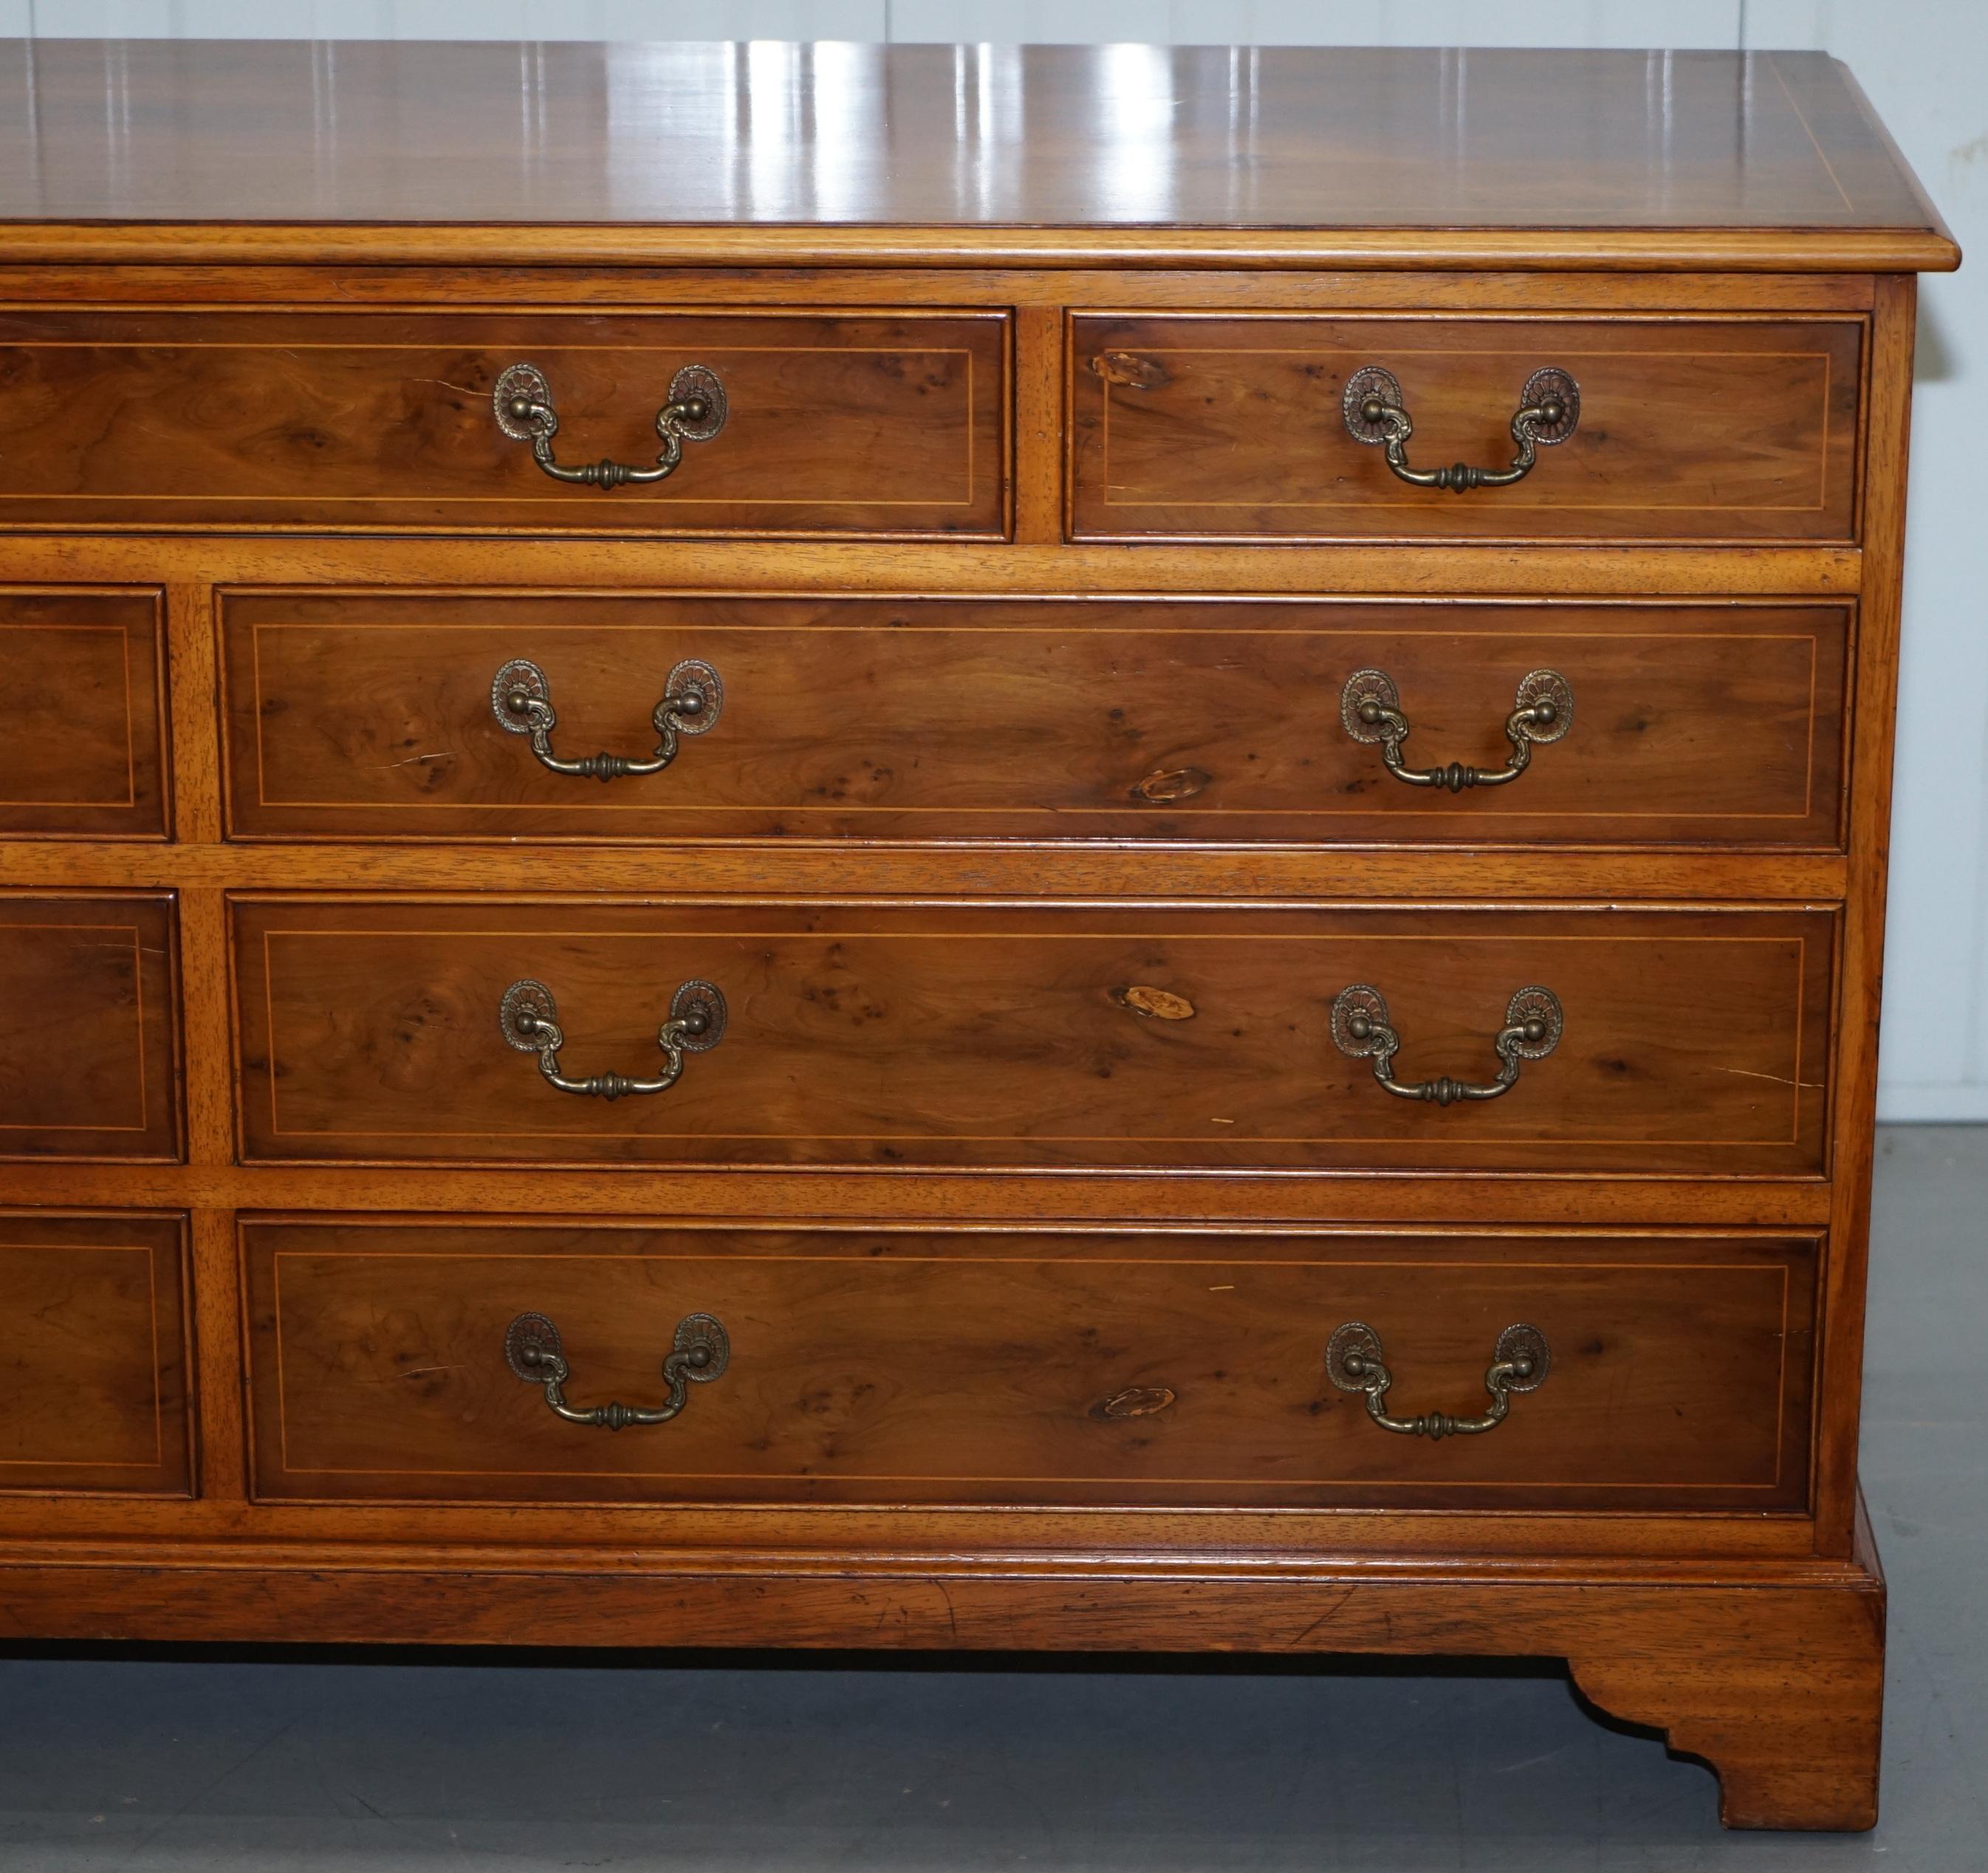 Vintage Burr Yew Wood Large Sideboard Bank of Drawers Campaign Style, England 1